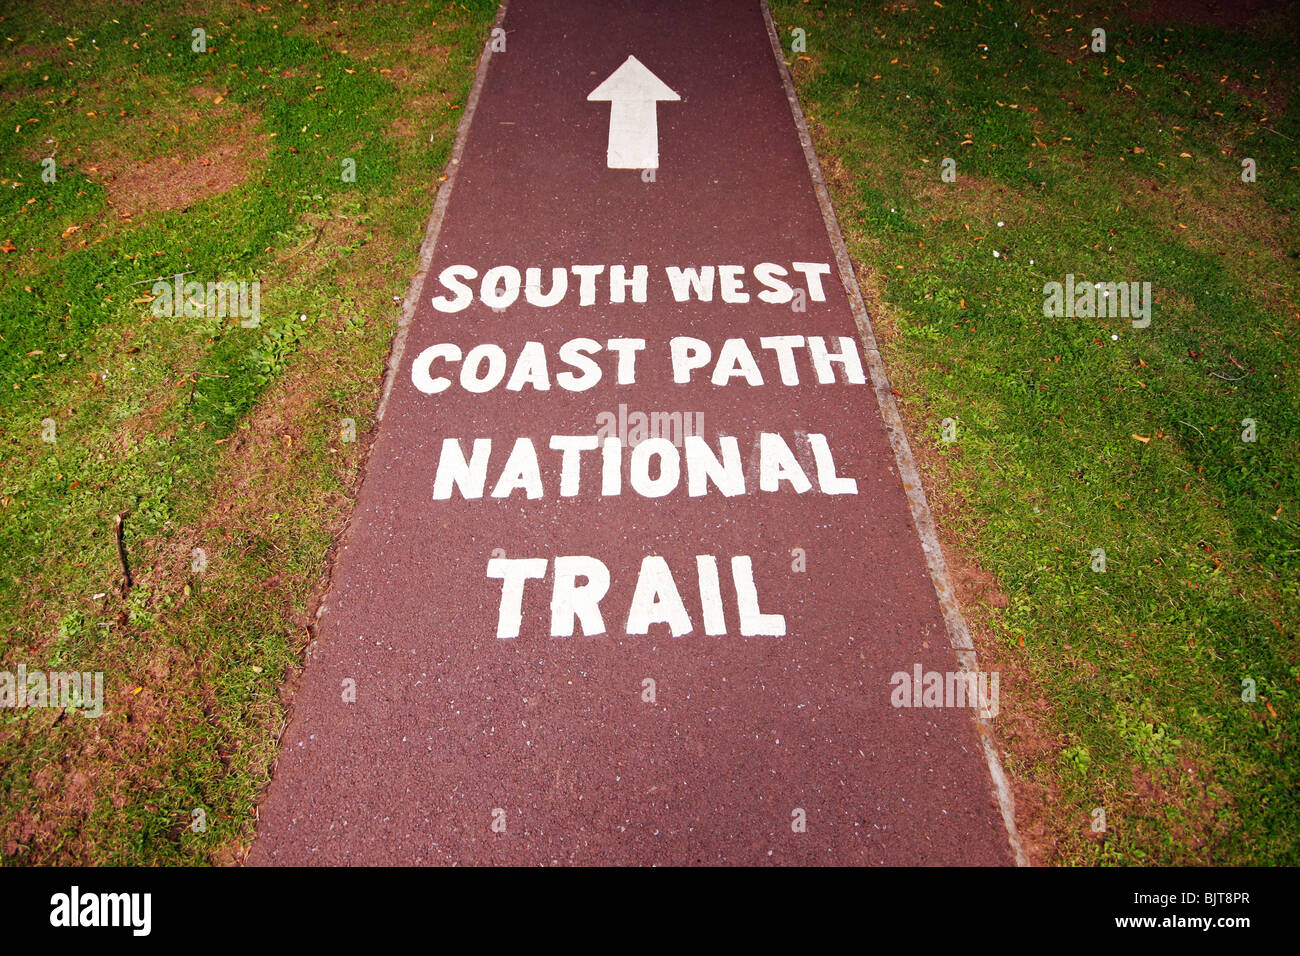 Start of the South West Coast Path National Trail in Minehead, Somerset, England Stock Photo